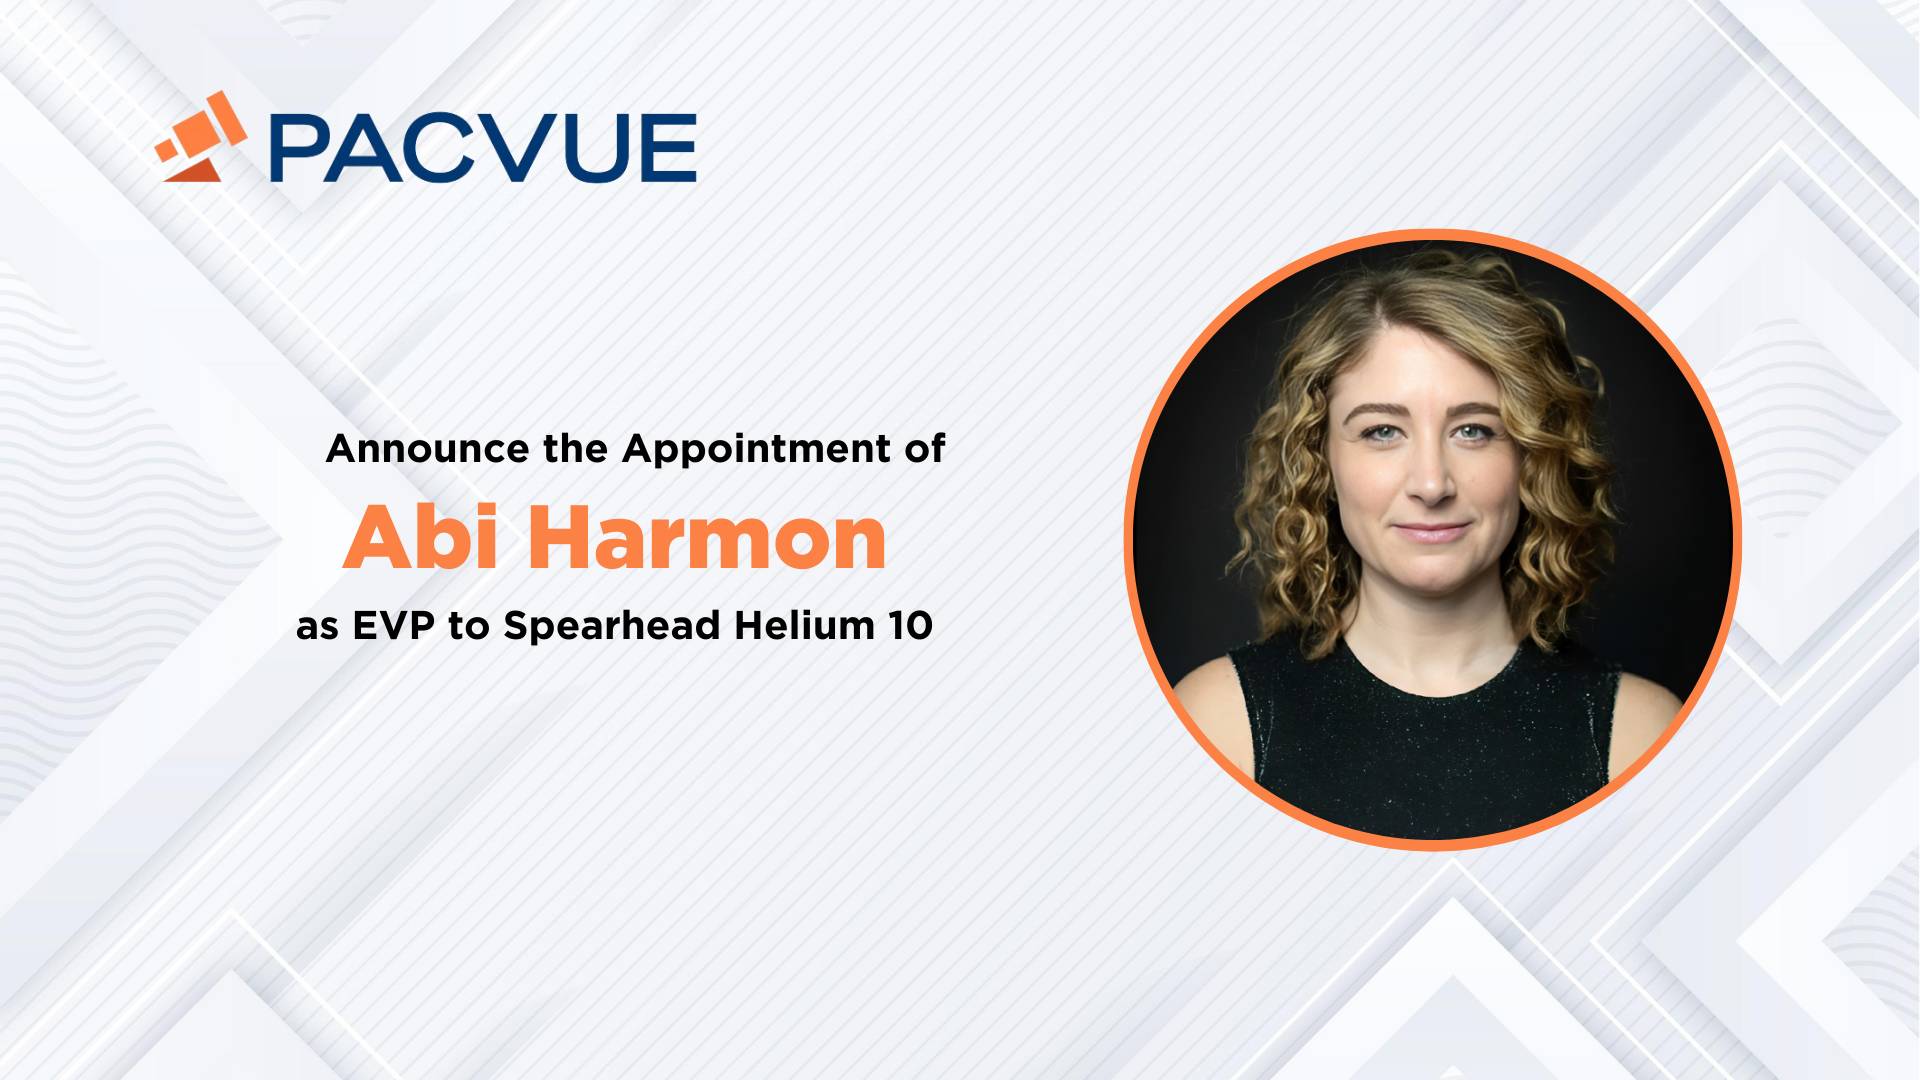 Pacvue Welcomes Tech Entrepreneur and Retail Industry Expert Abi Harmon as EVP to Spearhead Helium 10